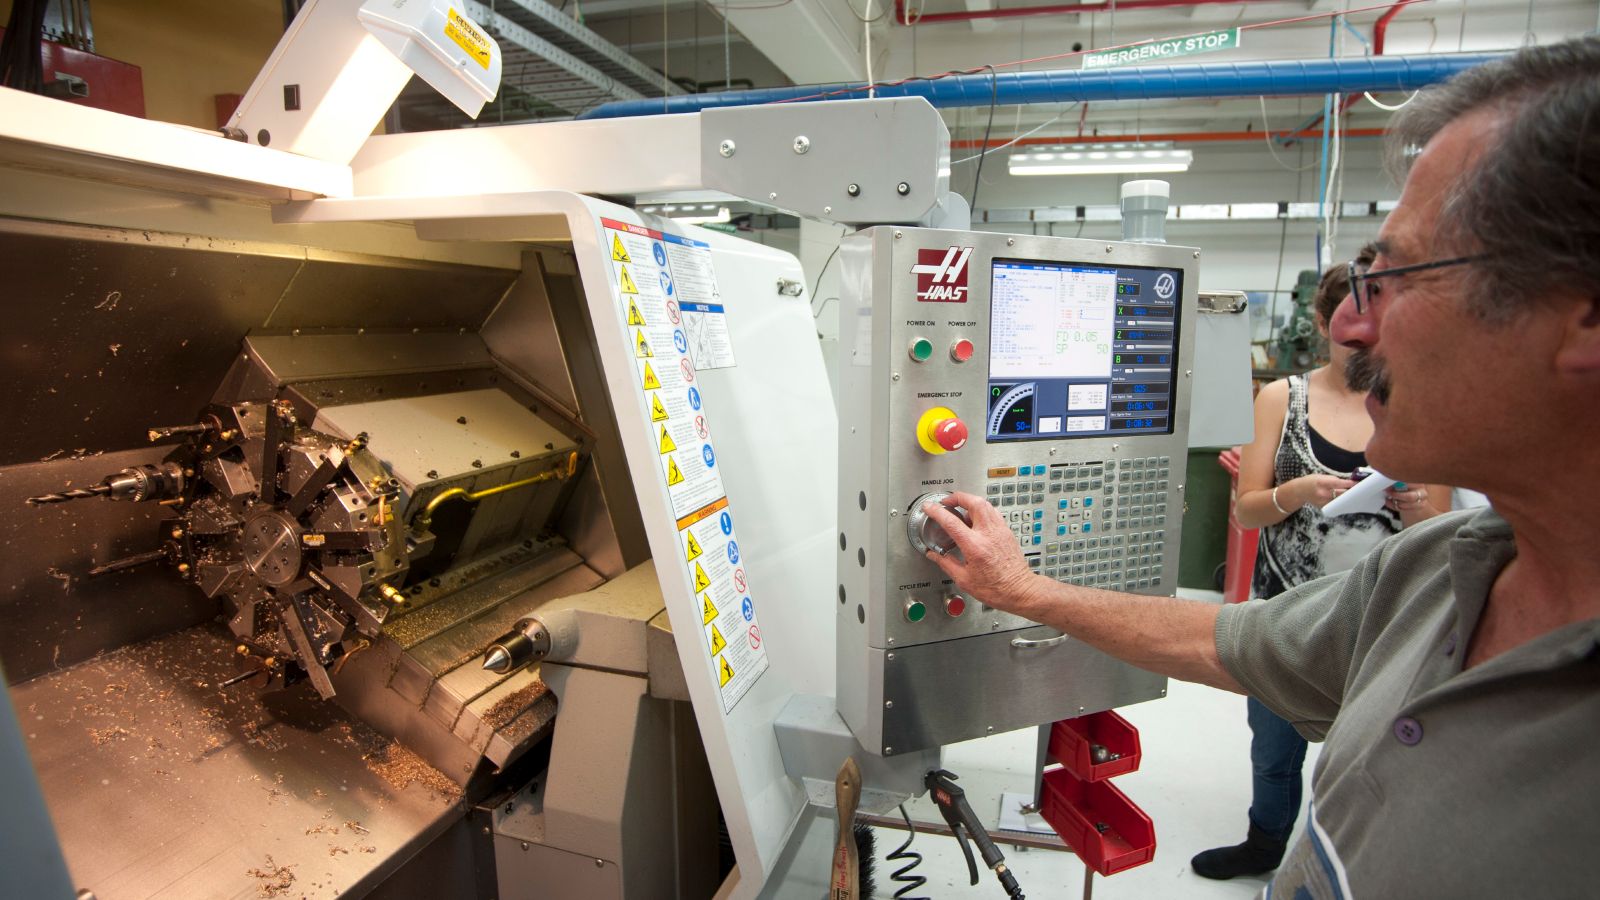 HAAS CNC lathe being used by technician